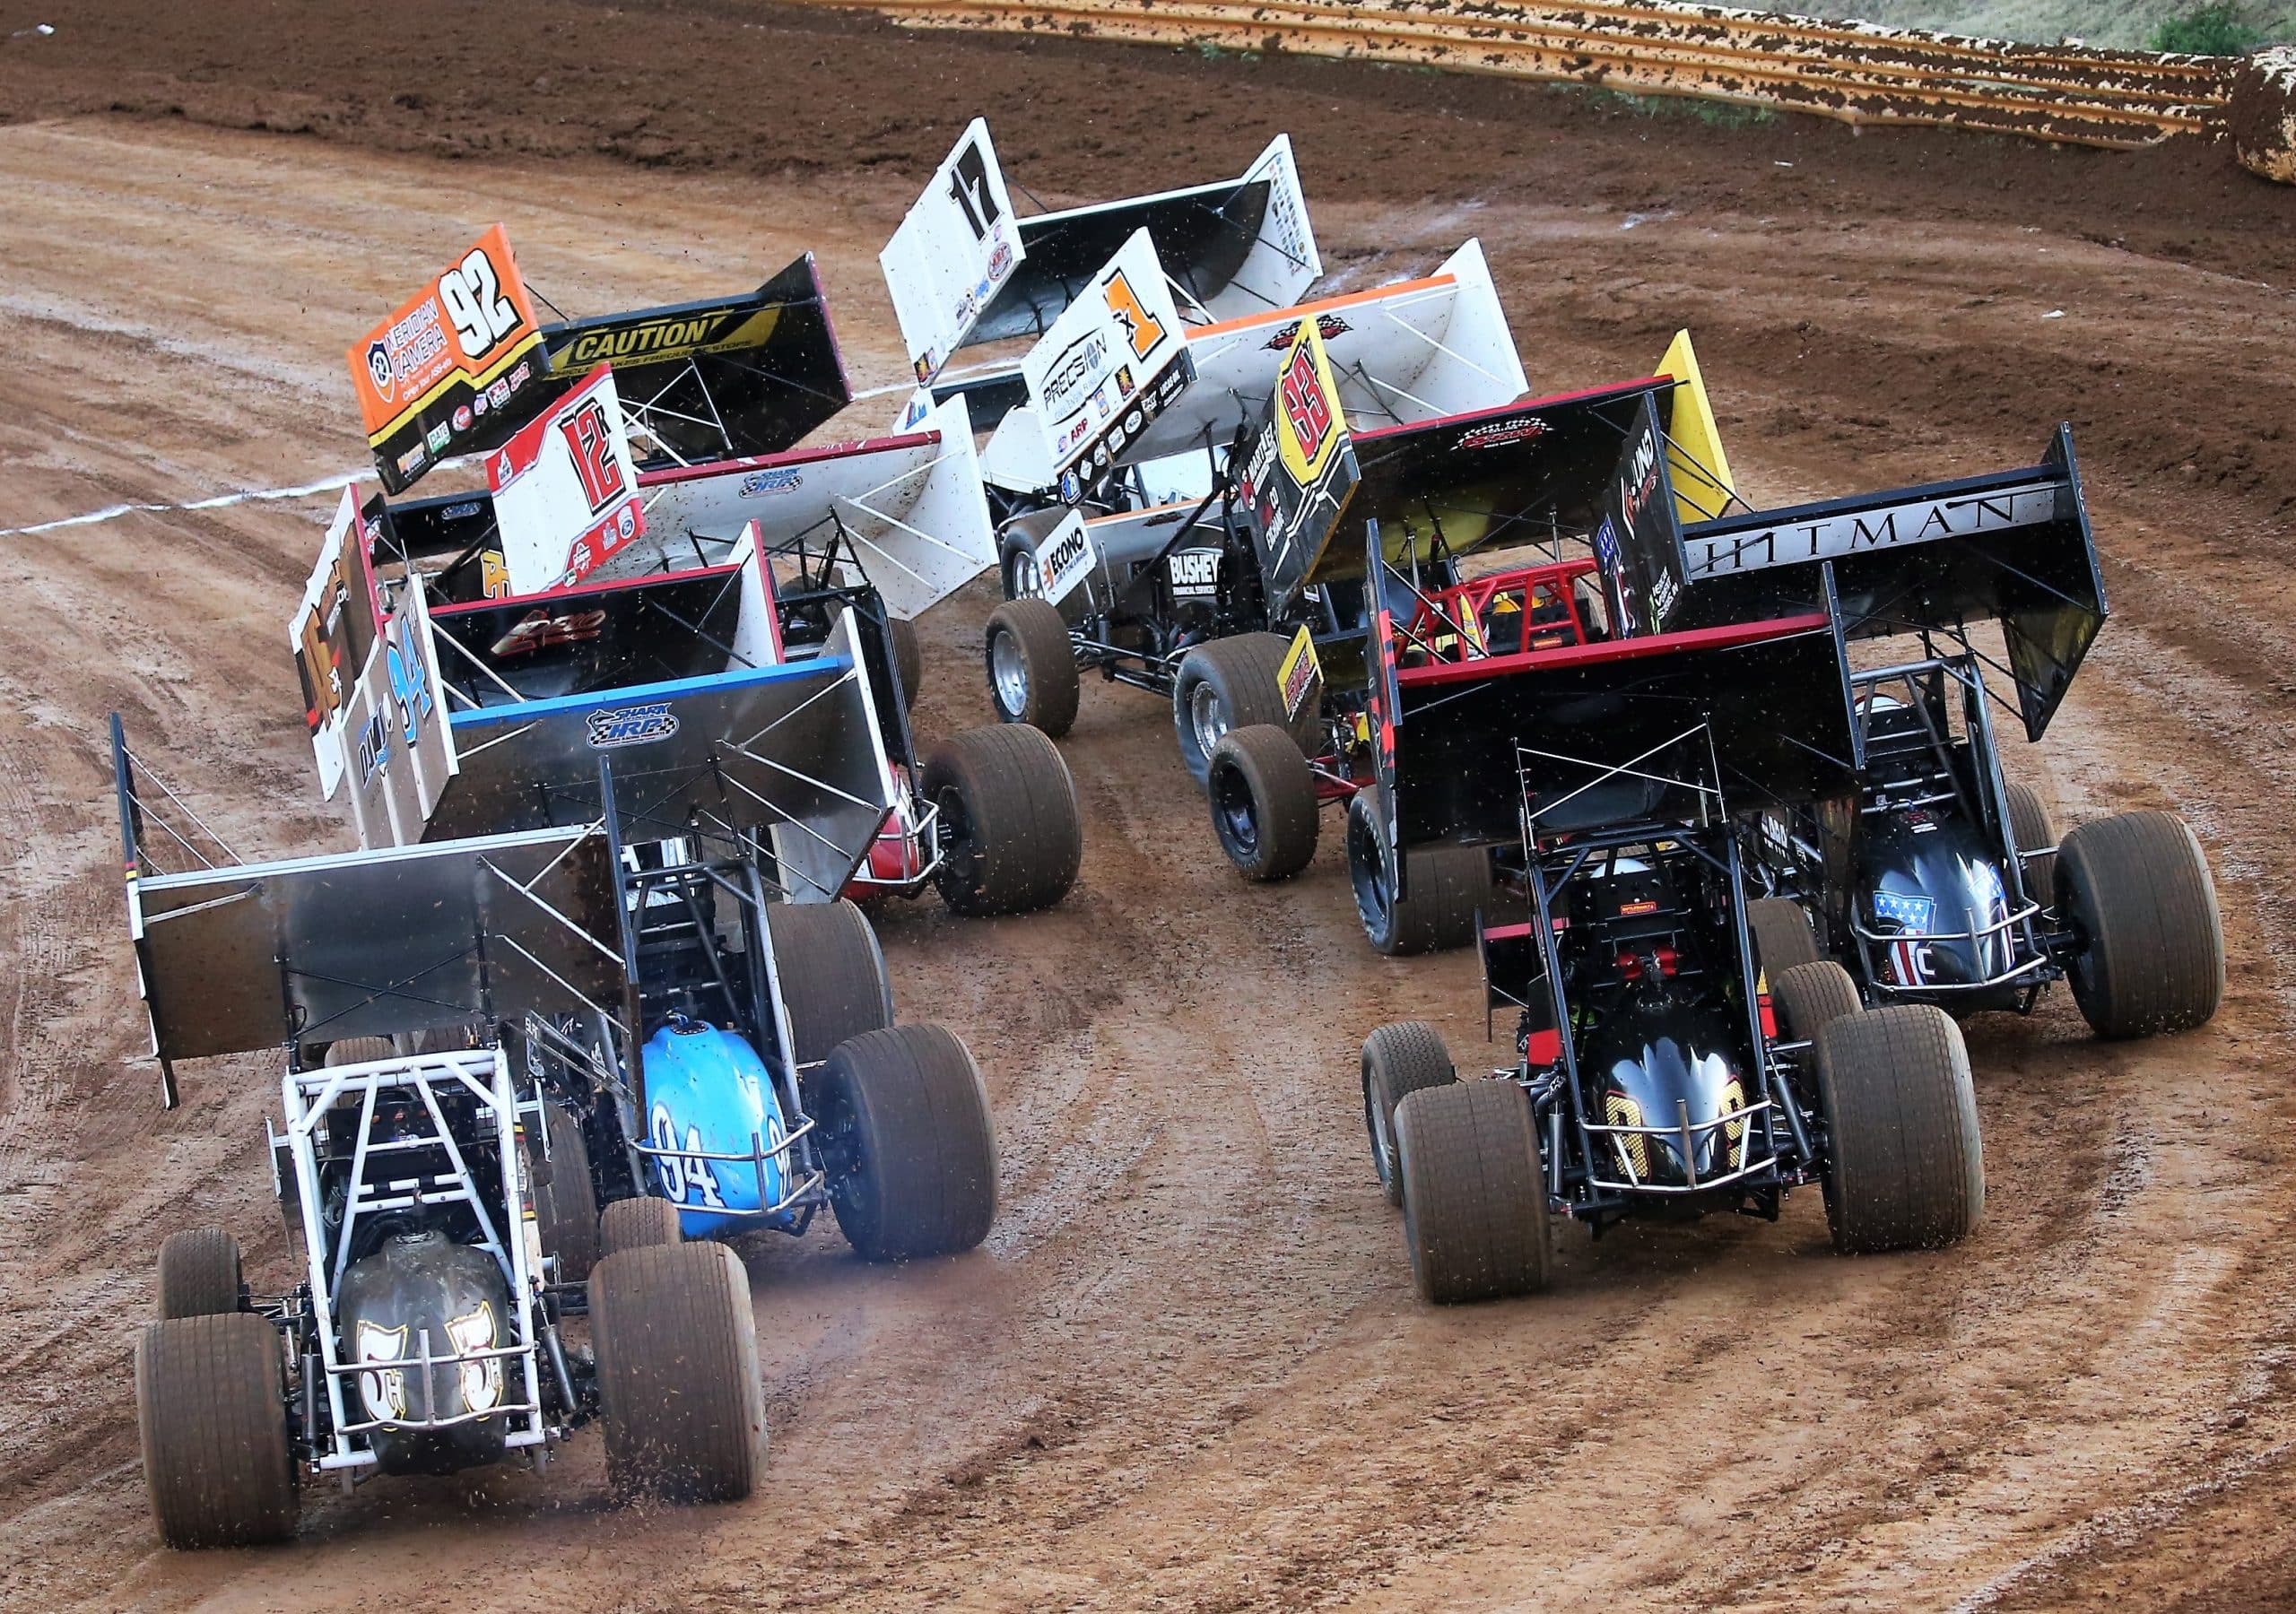 Championship point season wraps up Saturday in Placerville 